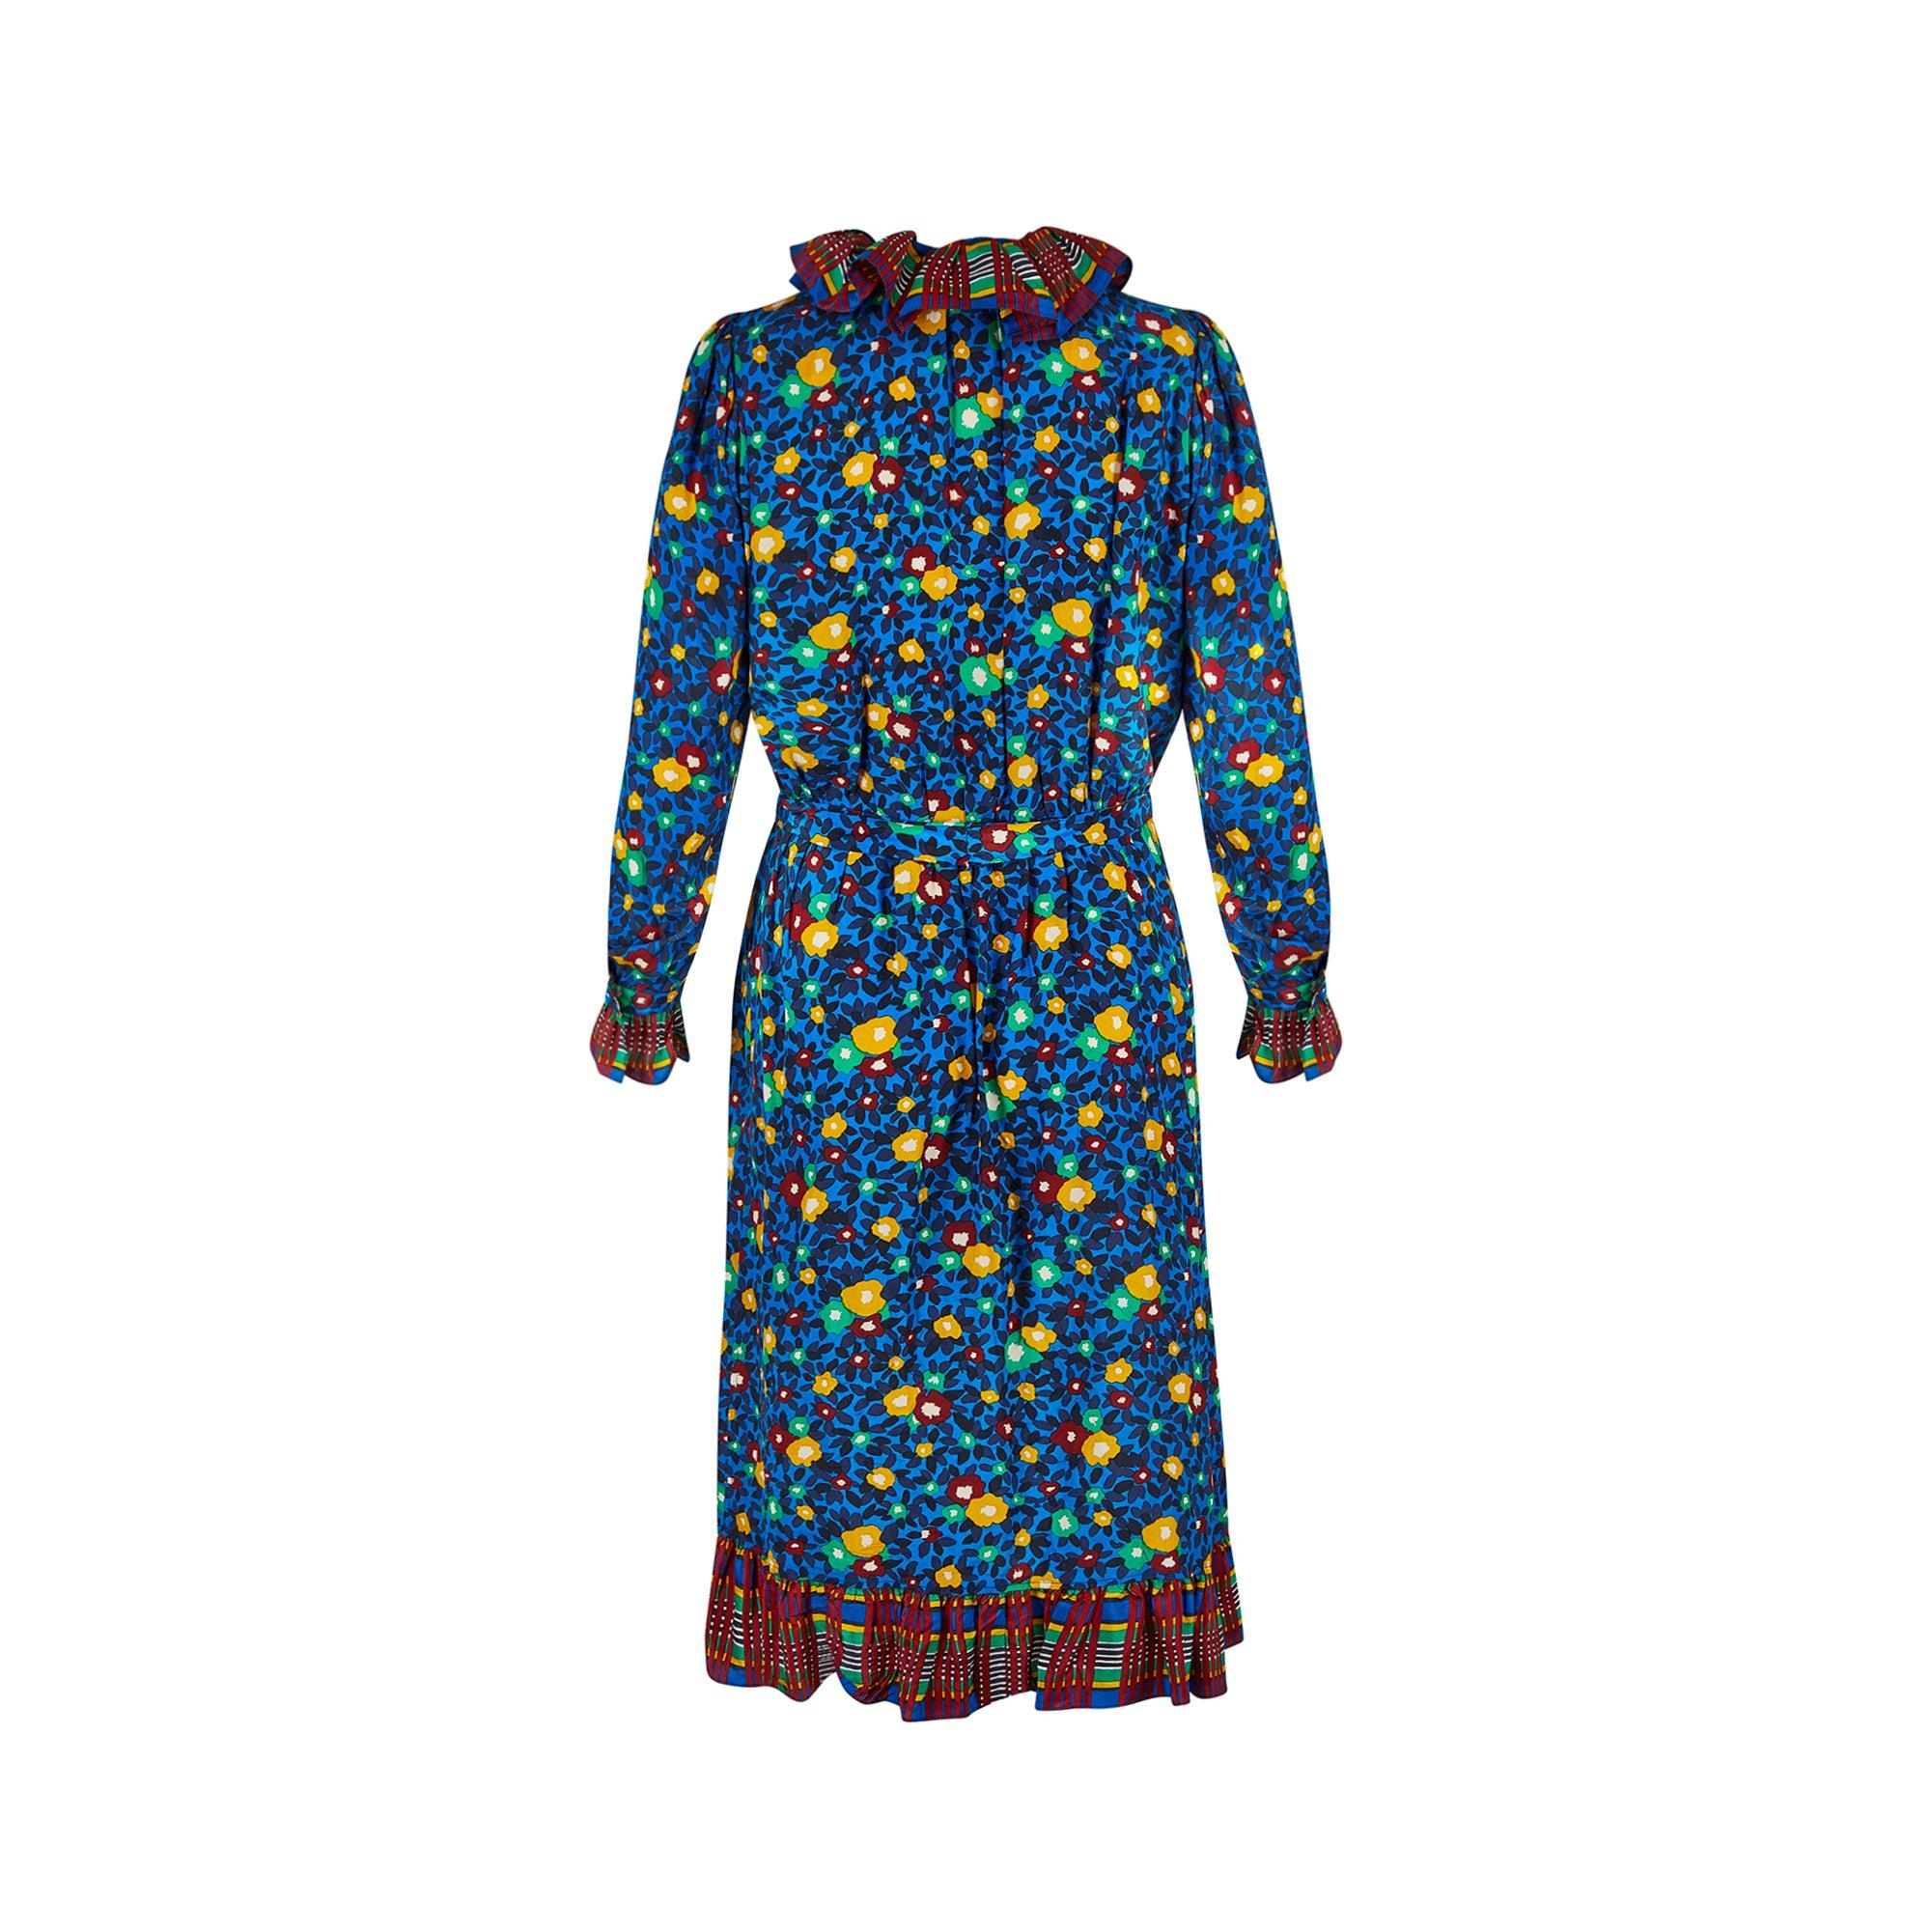 1980 Yves Saint Laurent Runway Floral Print Shirtwaister Dress In Excellent Condition For Sale In London, GB